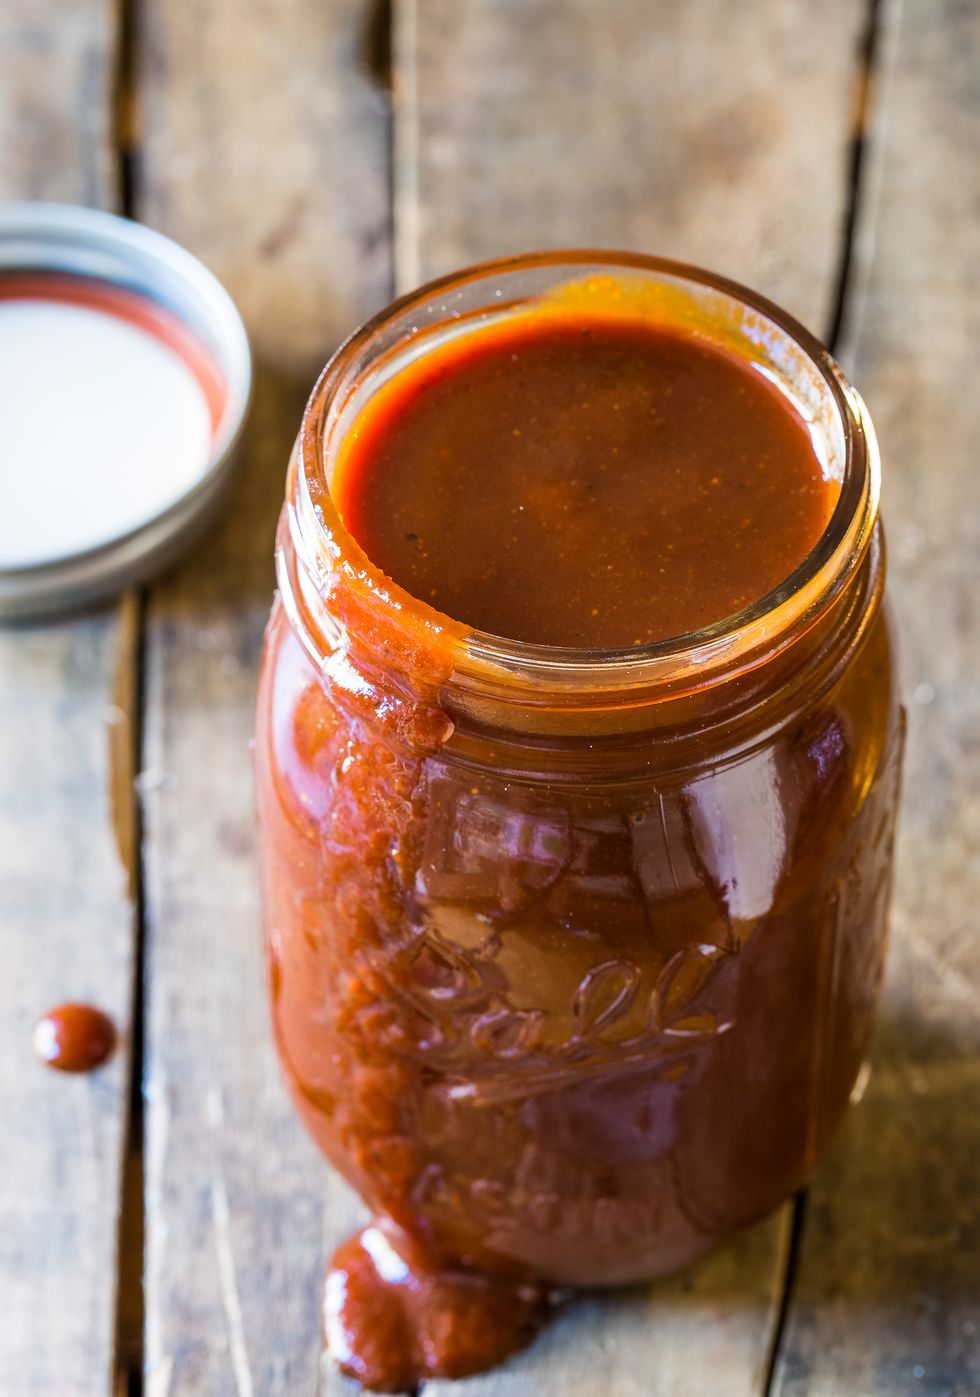 How to Make Barbecue Sauce